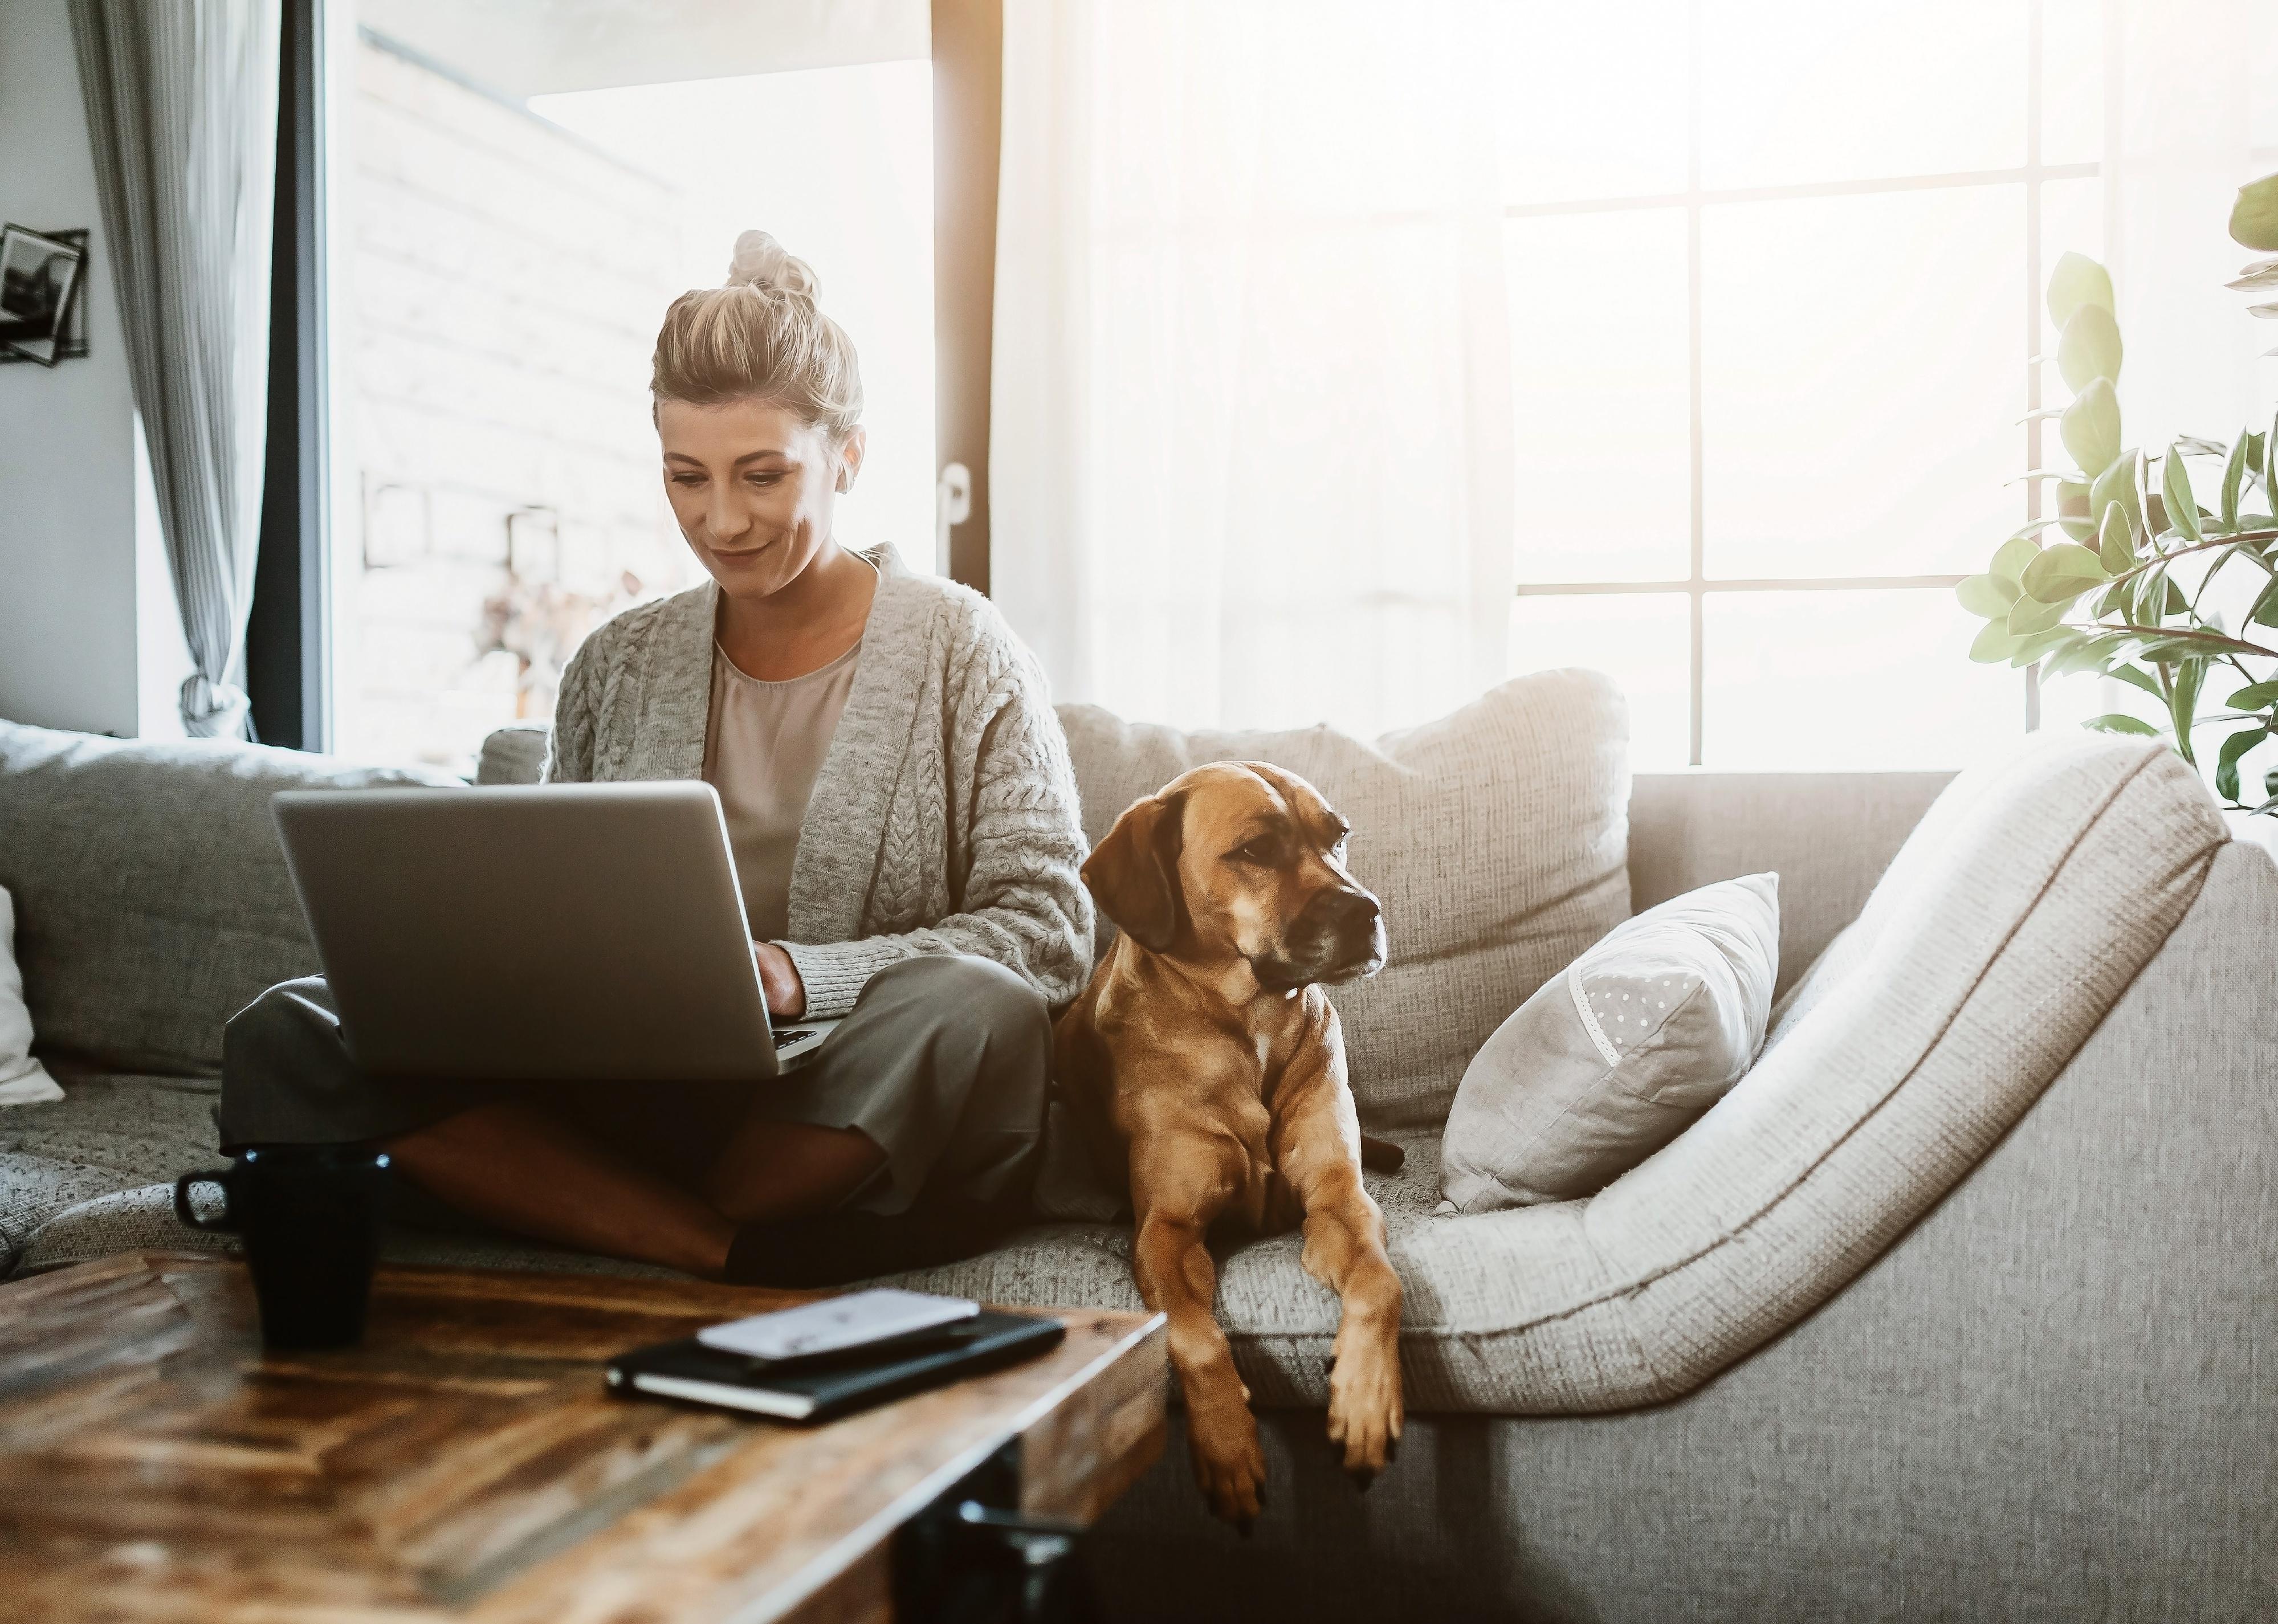 Woman working on laptop while sitting on couch with a dog.